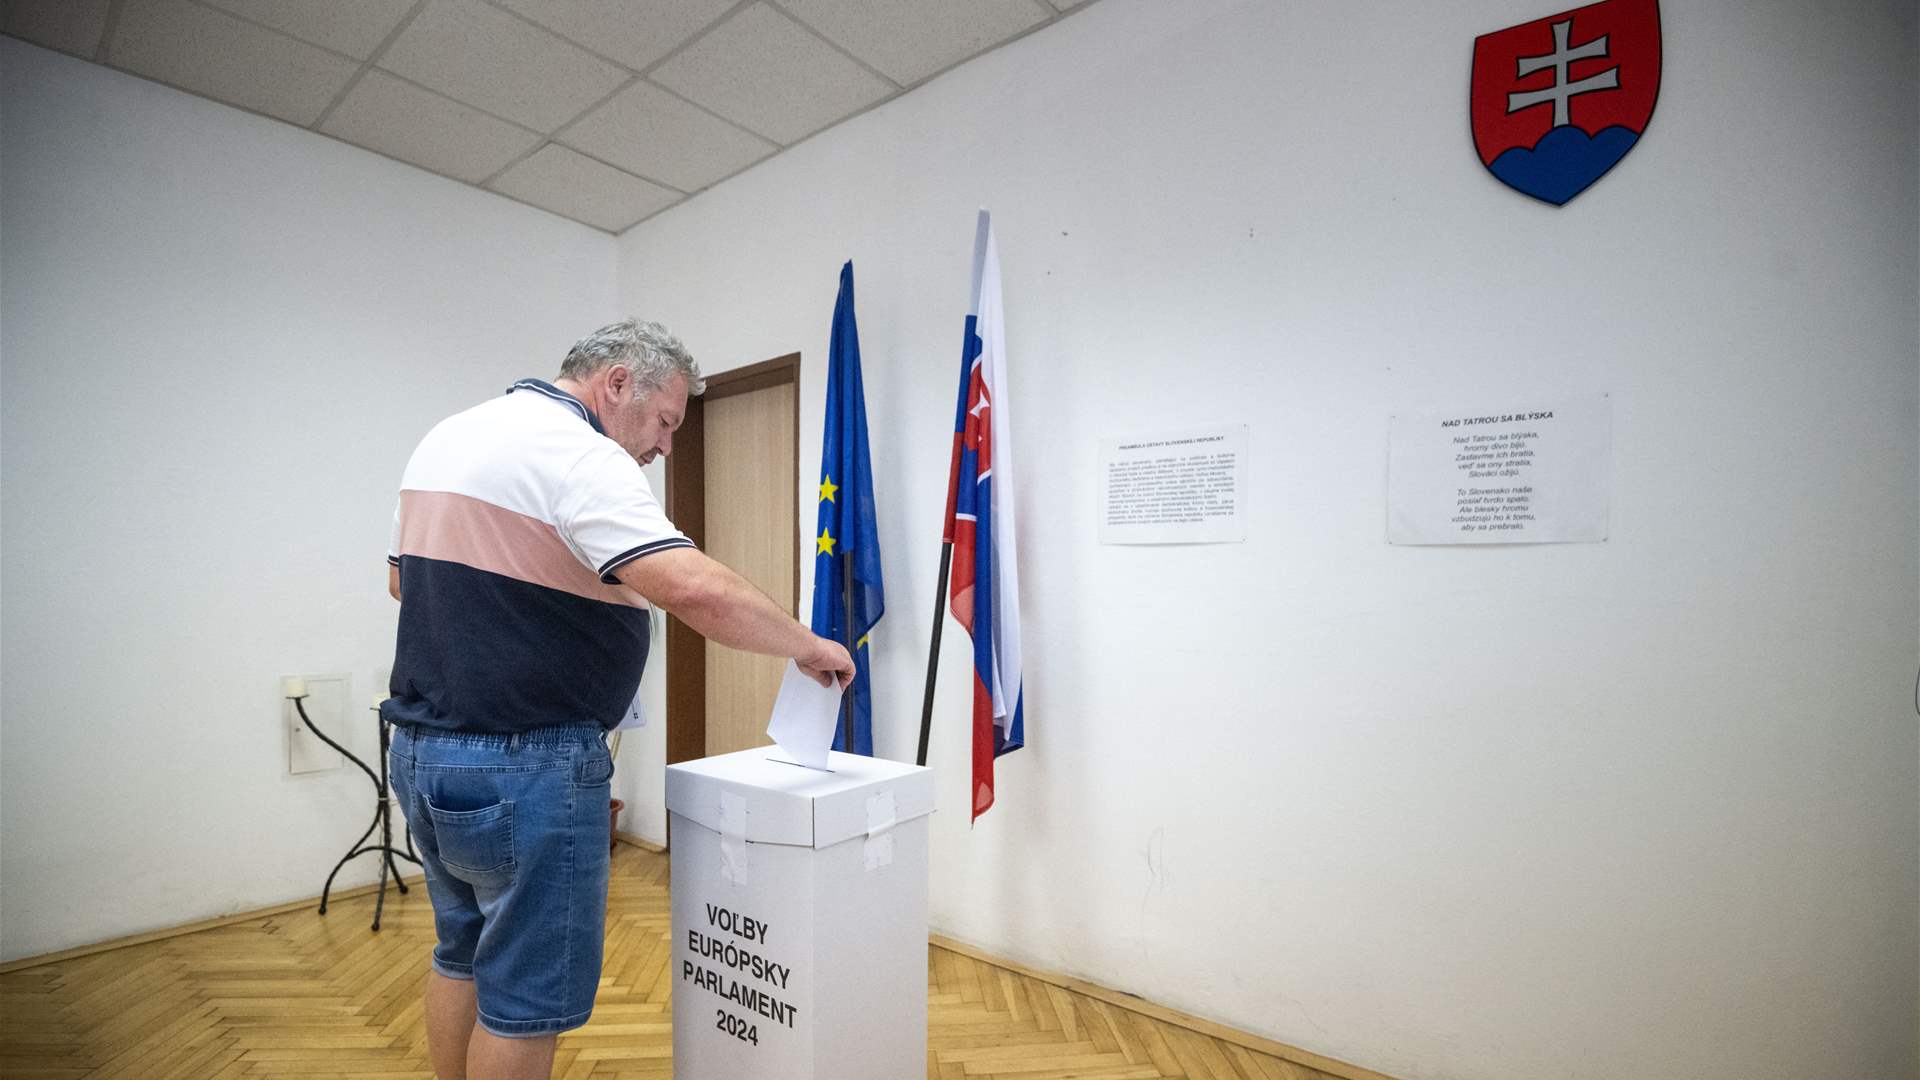 Liberals defeat Slovak PM party in European elections